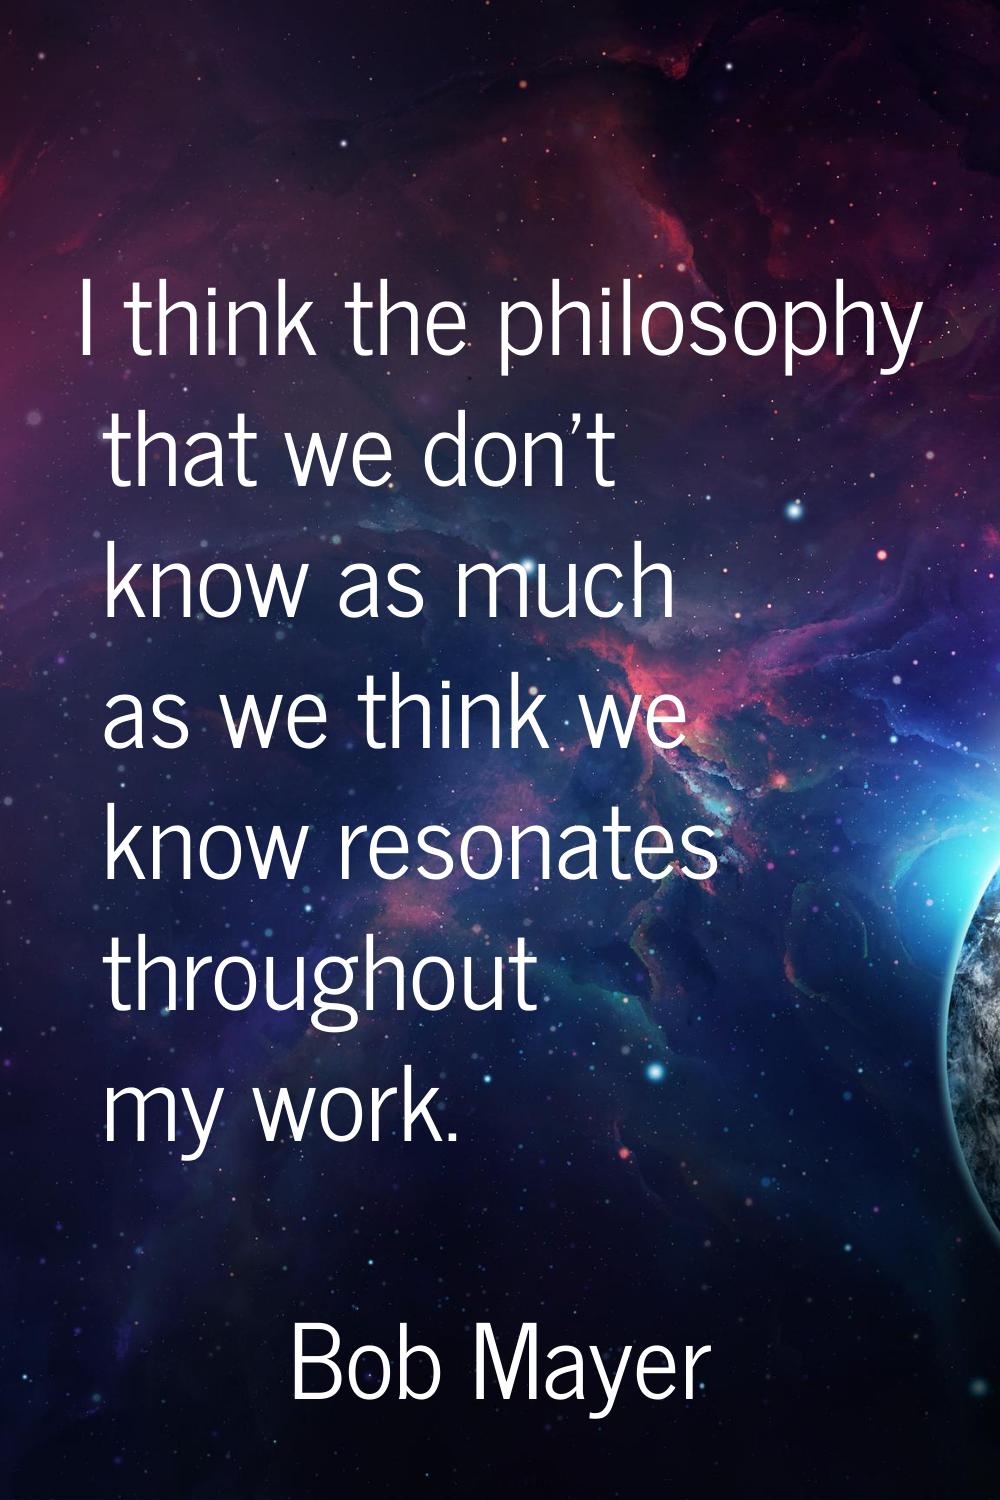 I think the philosophy that we don't know as much as we think we know resonates throughout my work.